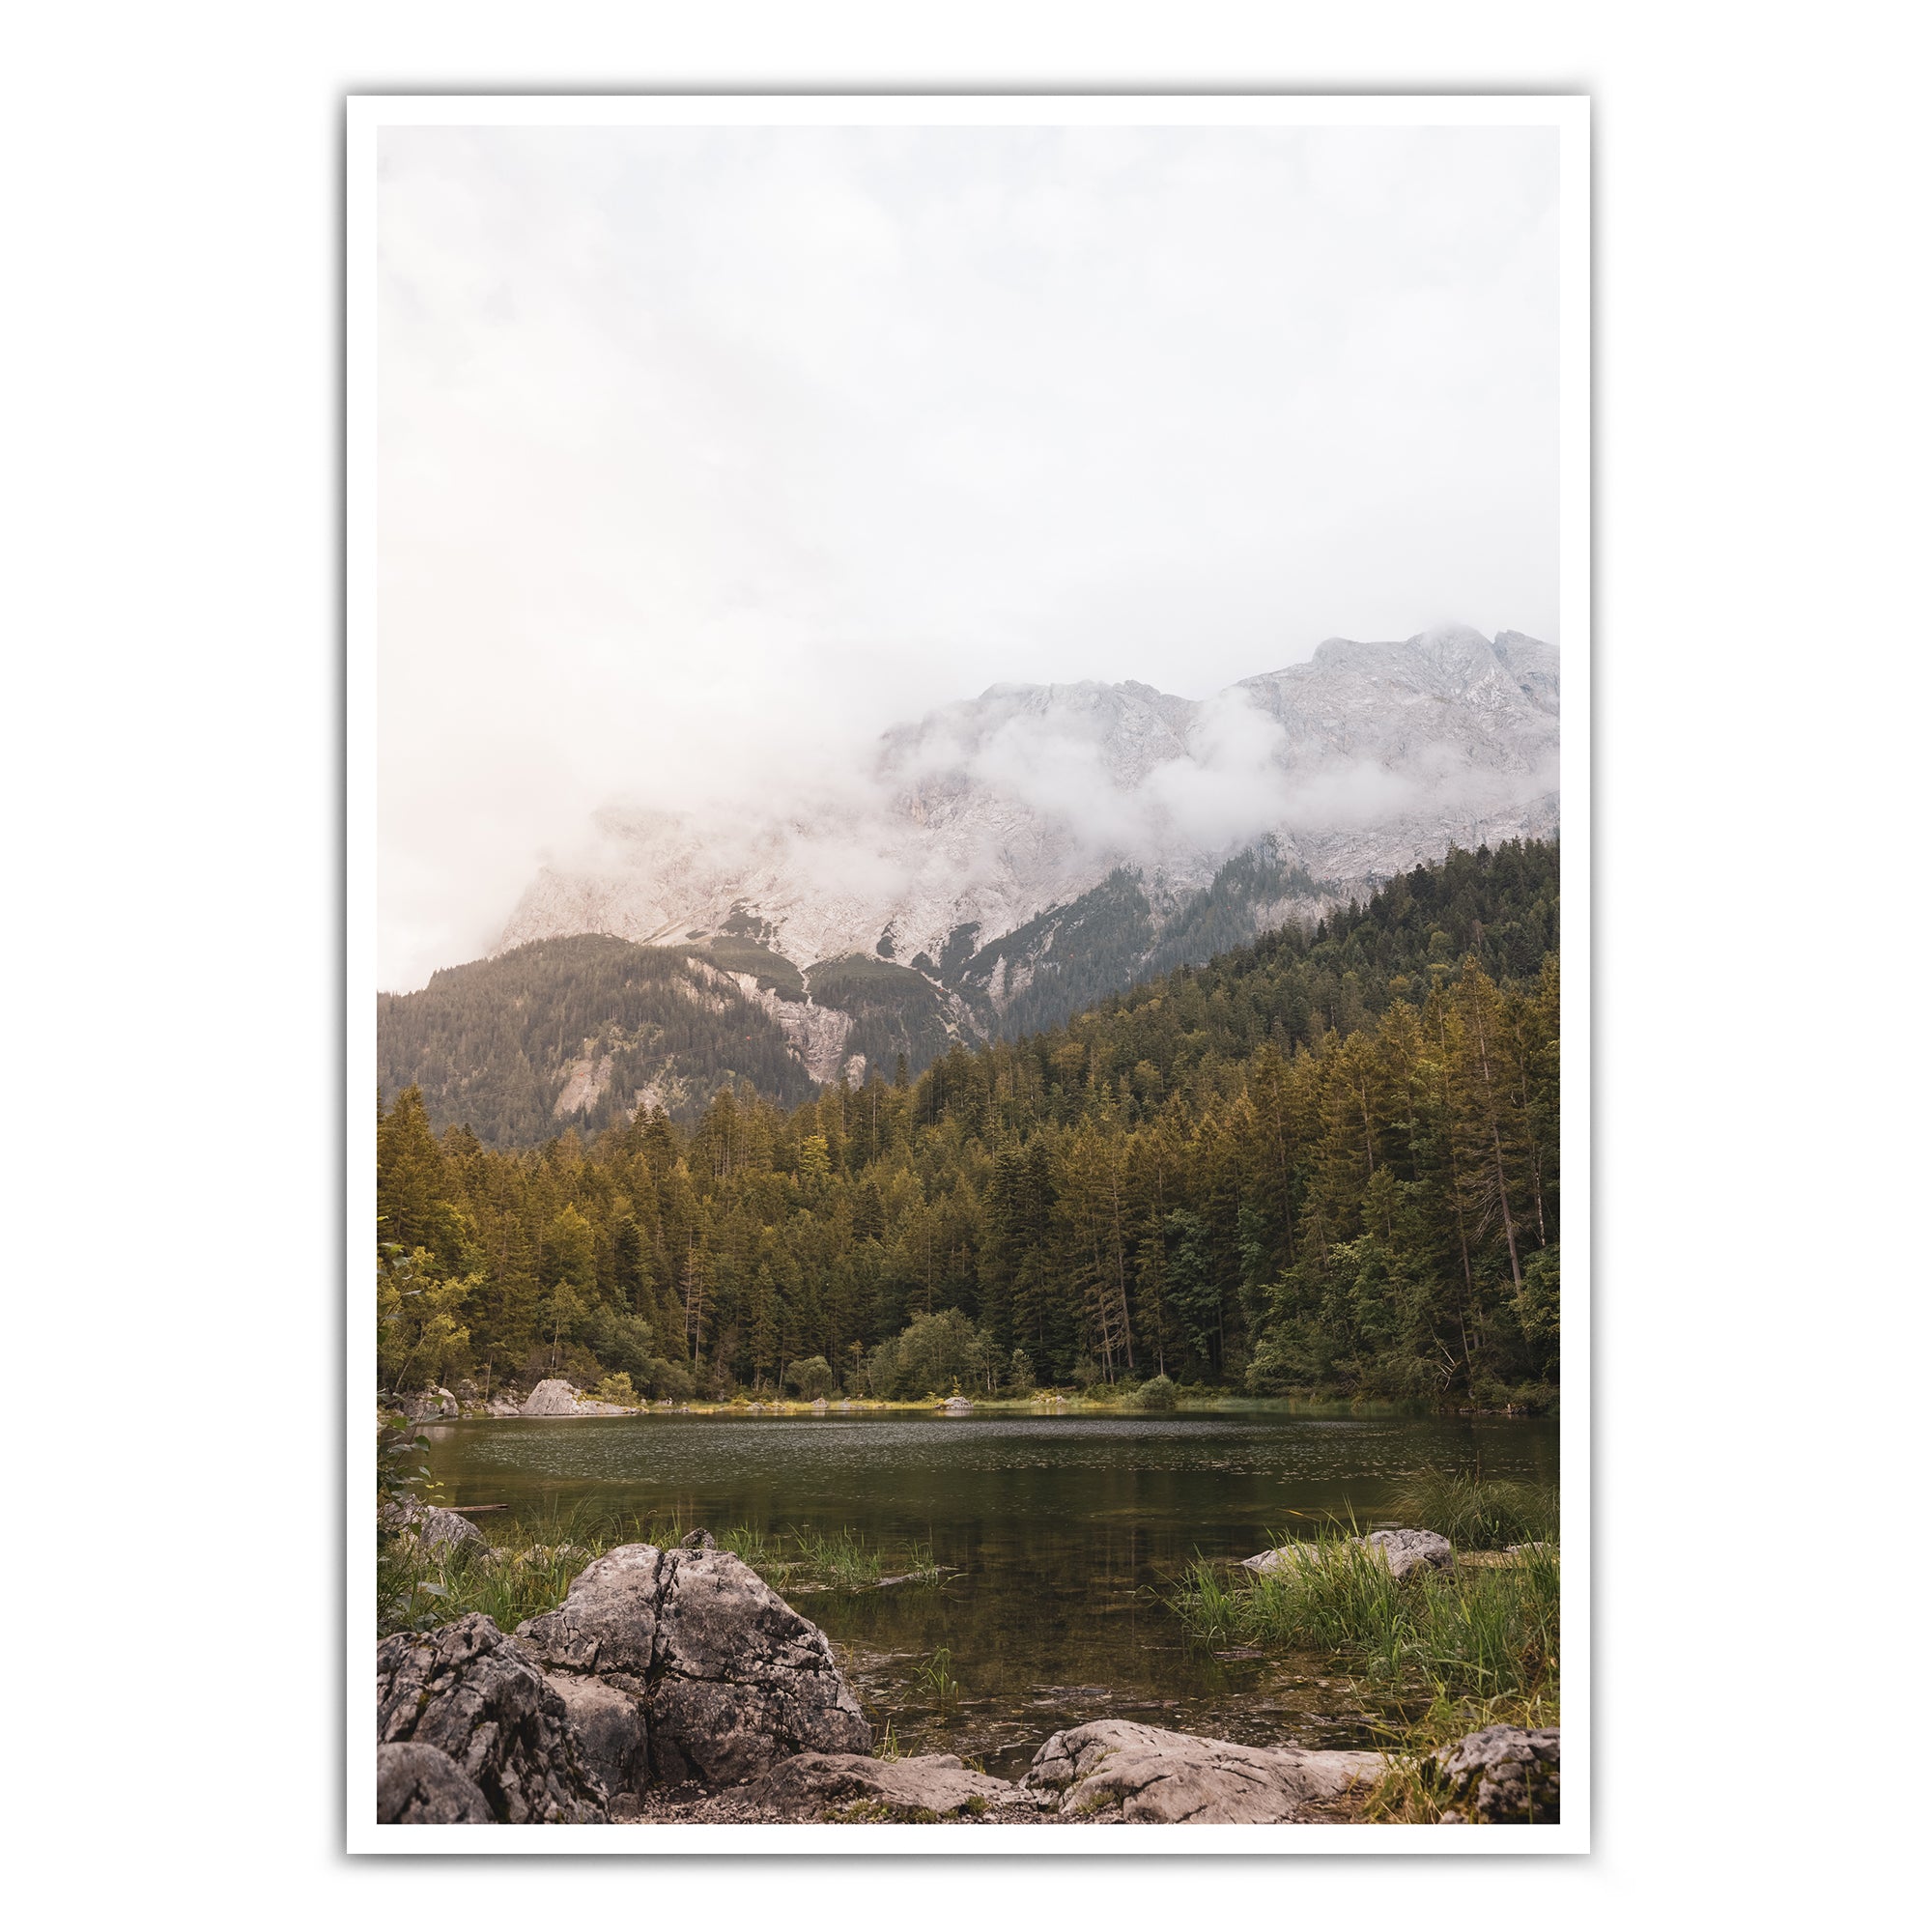 4onepictures_poster_wohnzimmer_natur_see_wald_berge_sonne_a4_a3_a2_bild_3e43dfb4-79de-4dca-aae7-56973f2c5a62.jpg